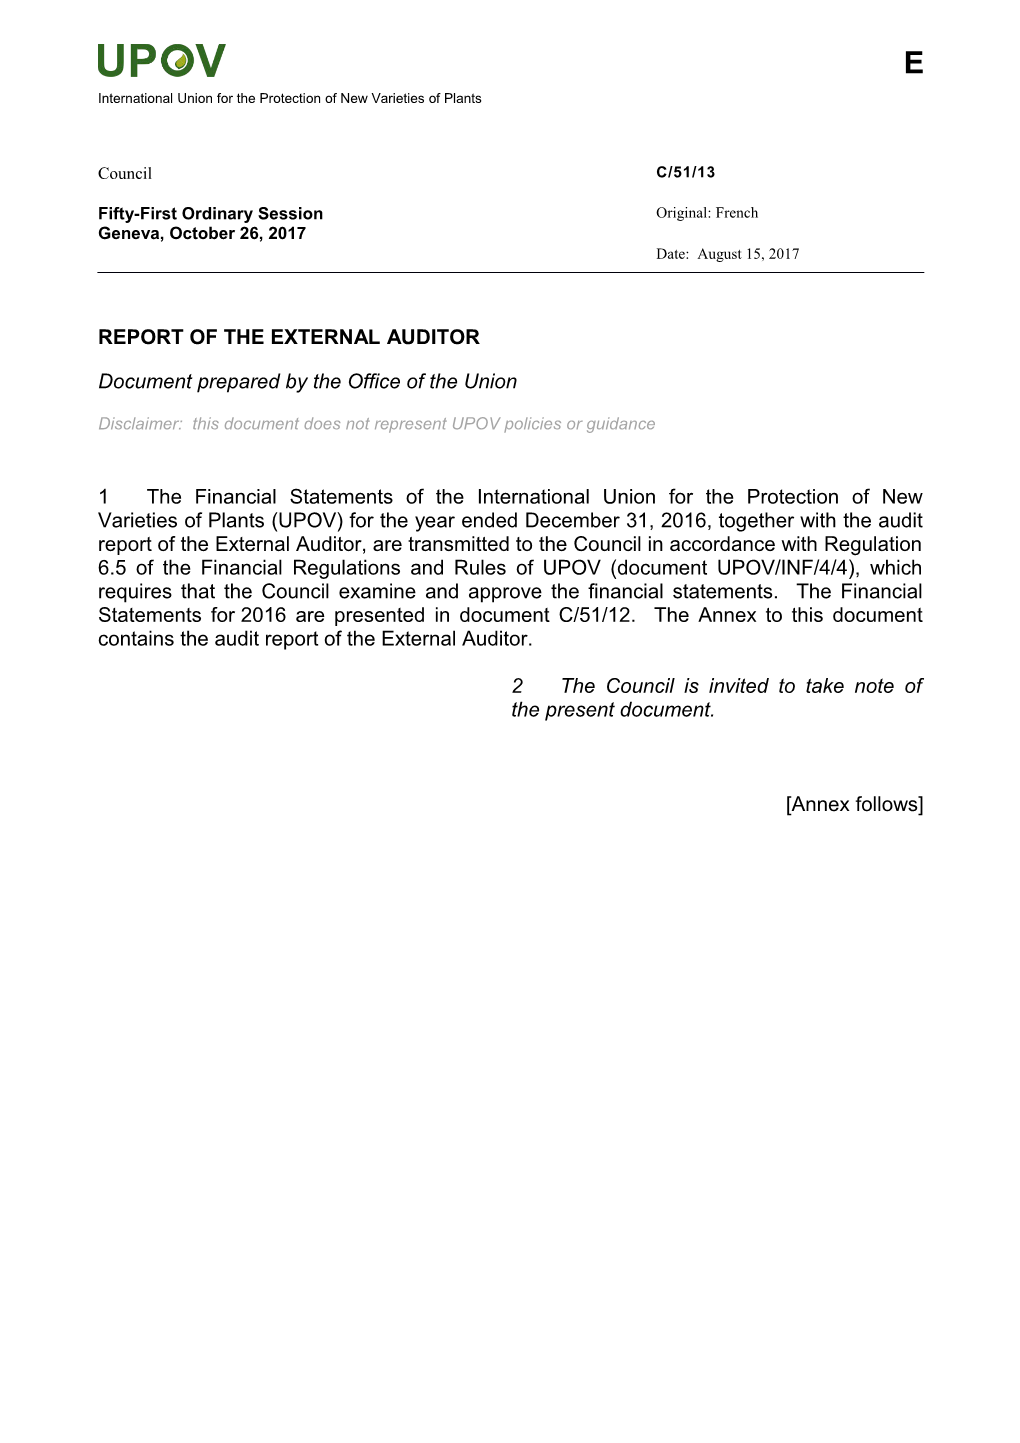 Report of the External Auditor